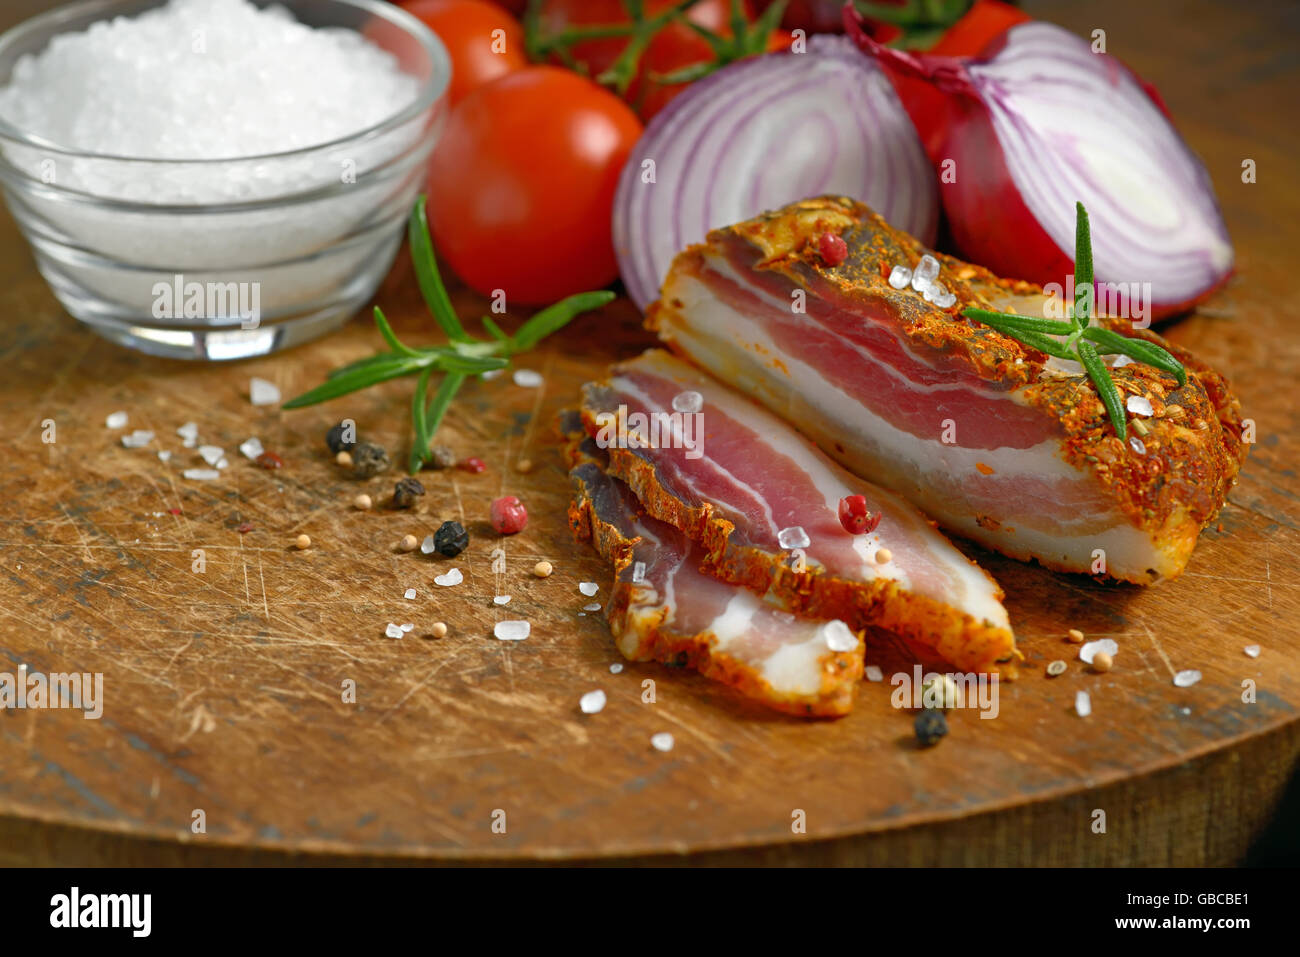 smoked bacon and vegetables on wooden table Stock Photo